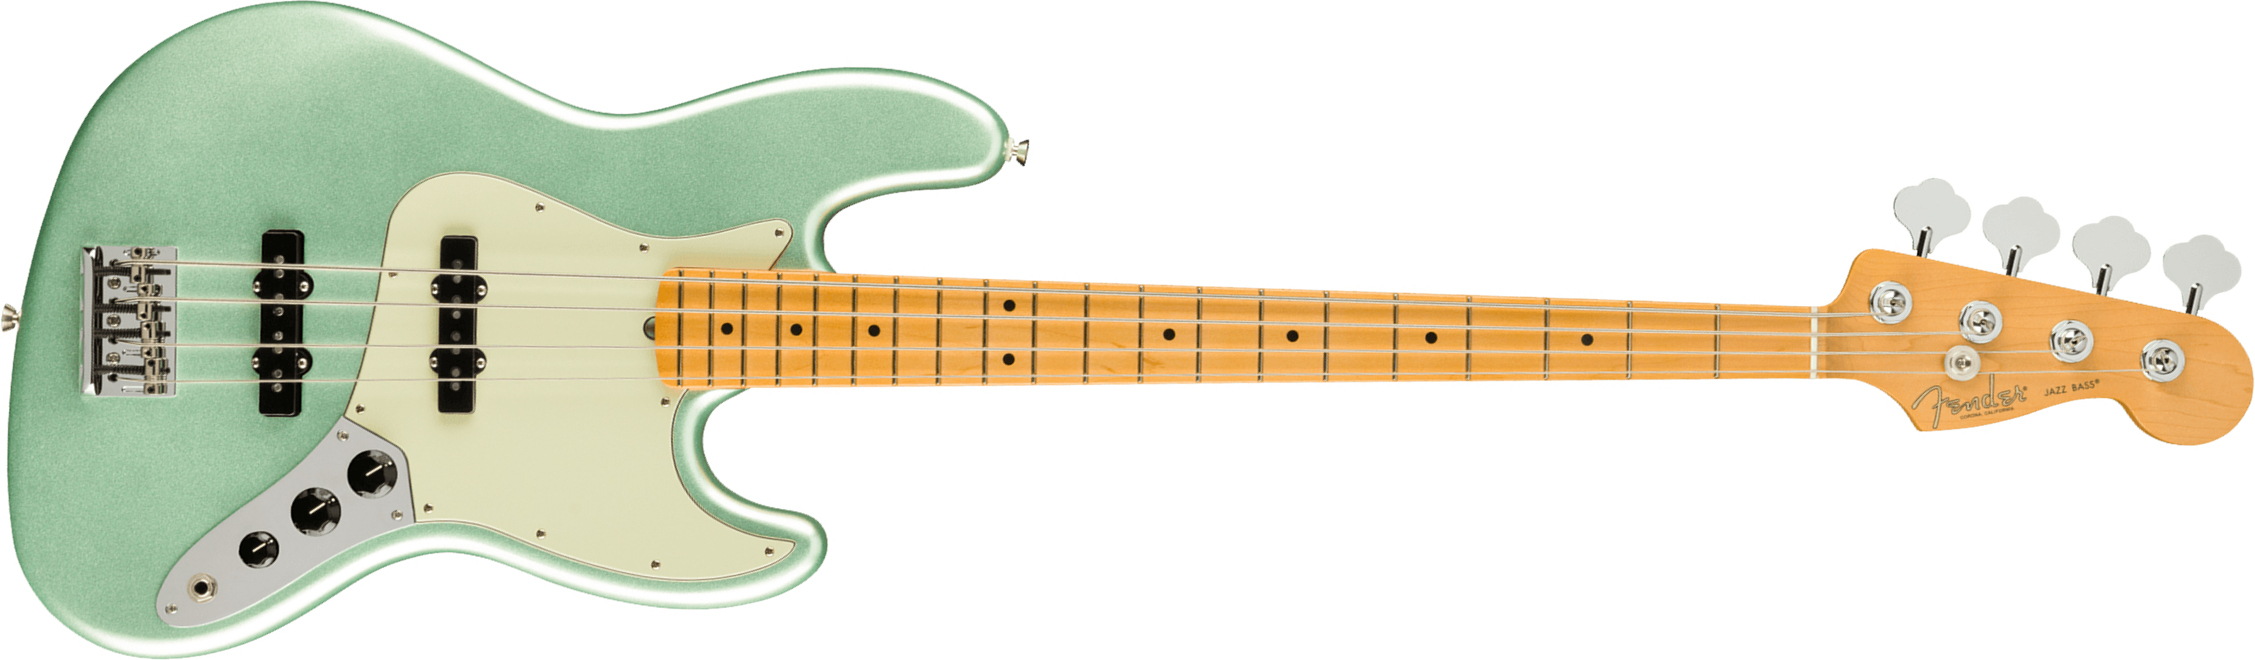 Fender Jazz Bass American Professional Ii Usa Mn - Mystic Surf Green - Solidbody E-bass - Main picture